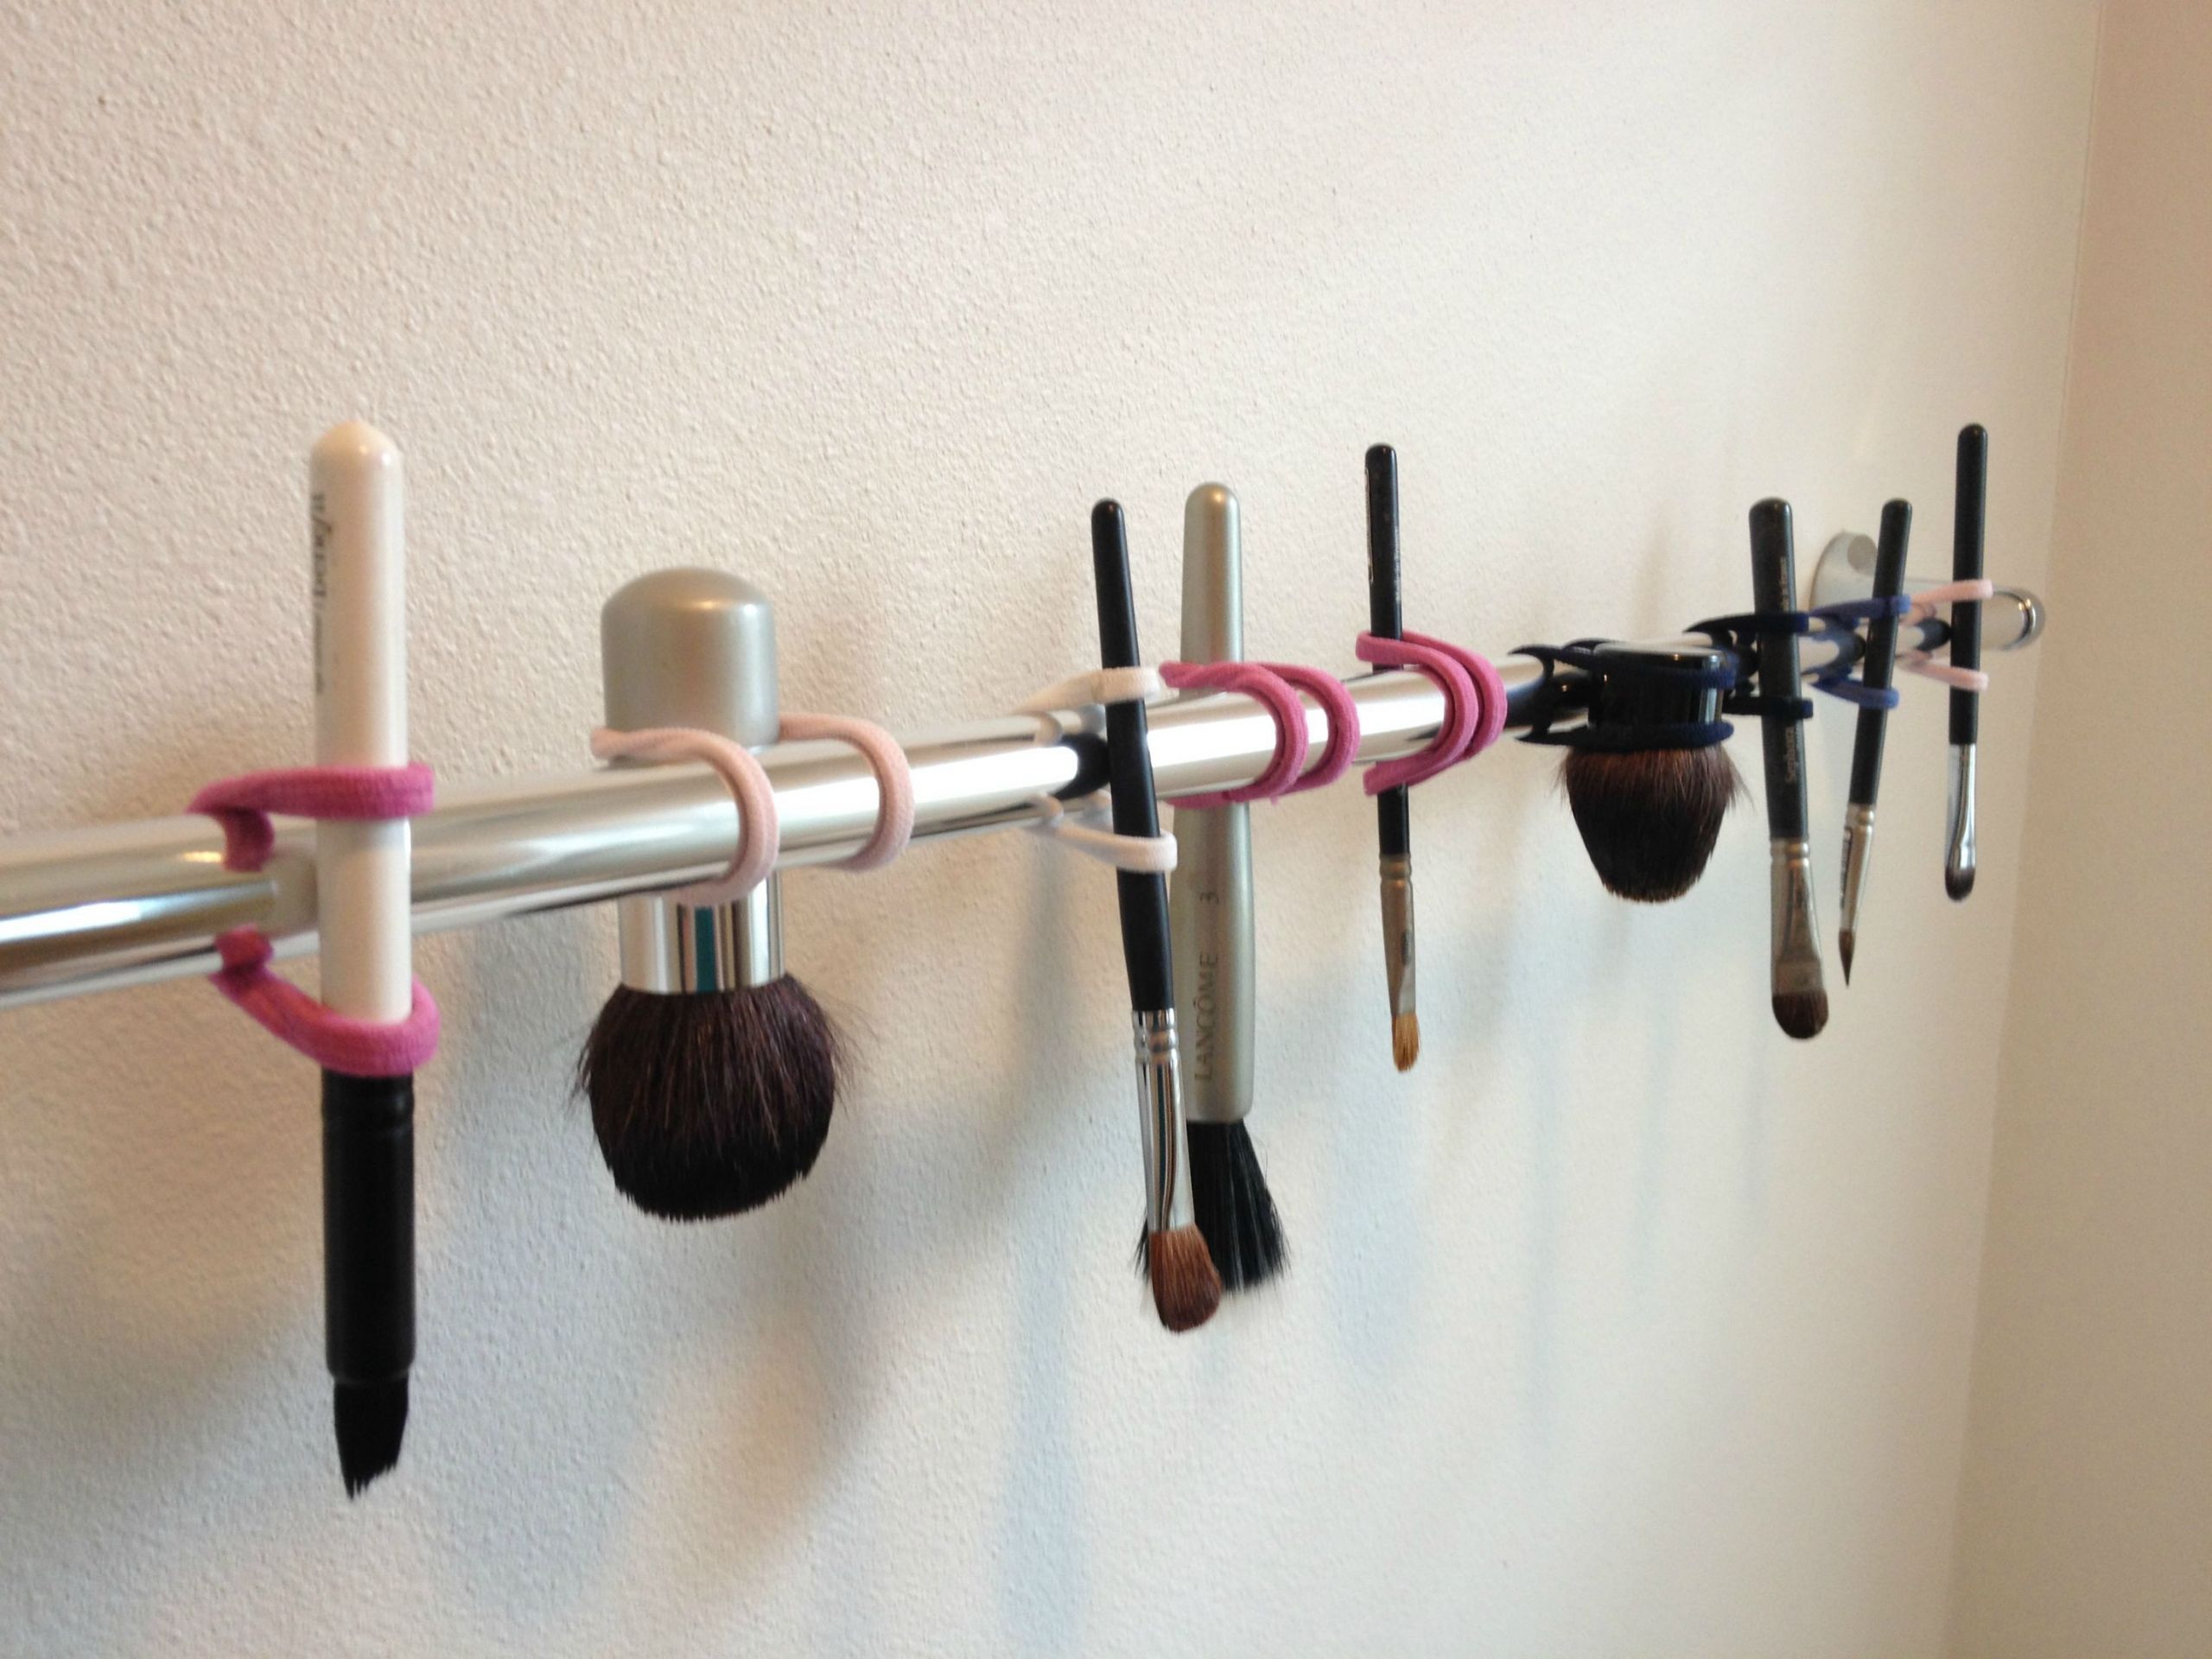 DIY Makeup Brush Drying Rack
 The Beauty Junkie’s Guide To Cleaning Your Makeup Tools